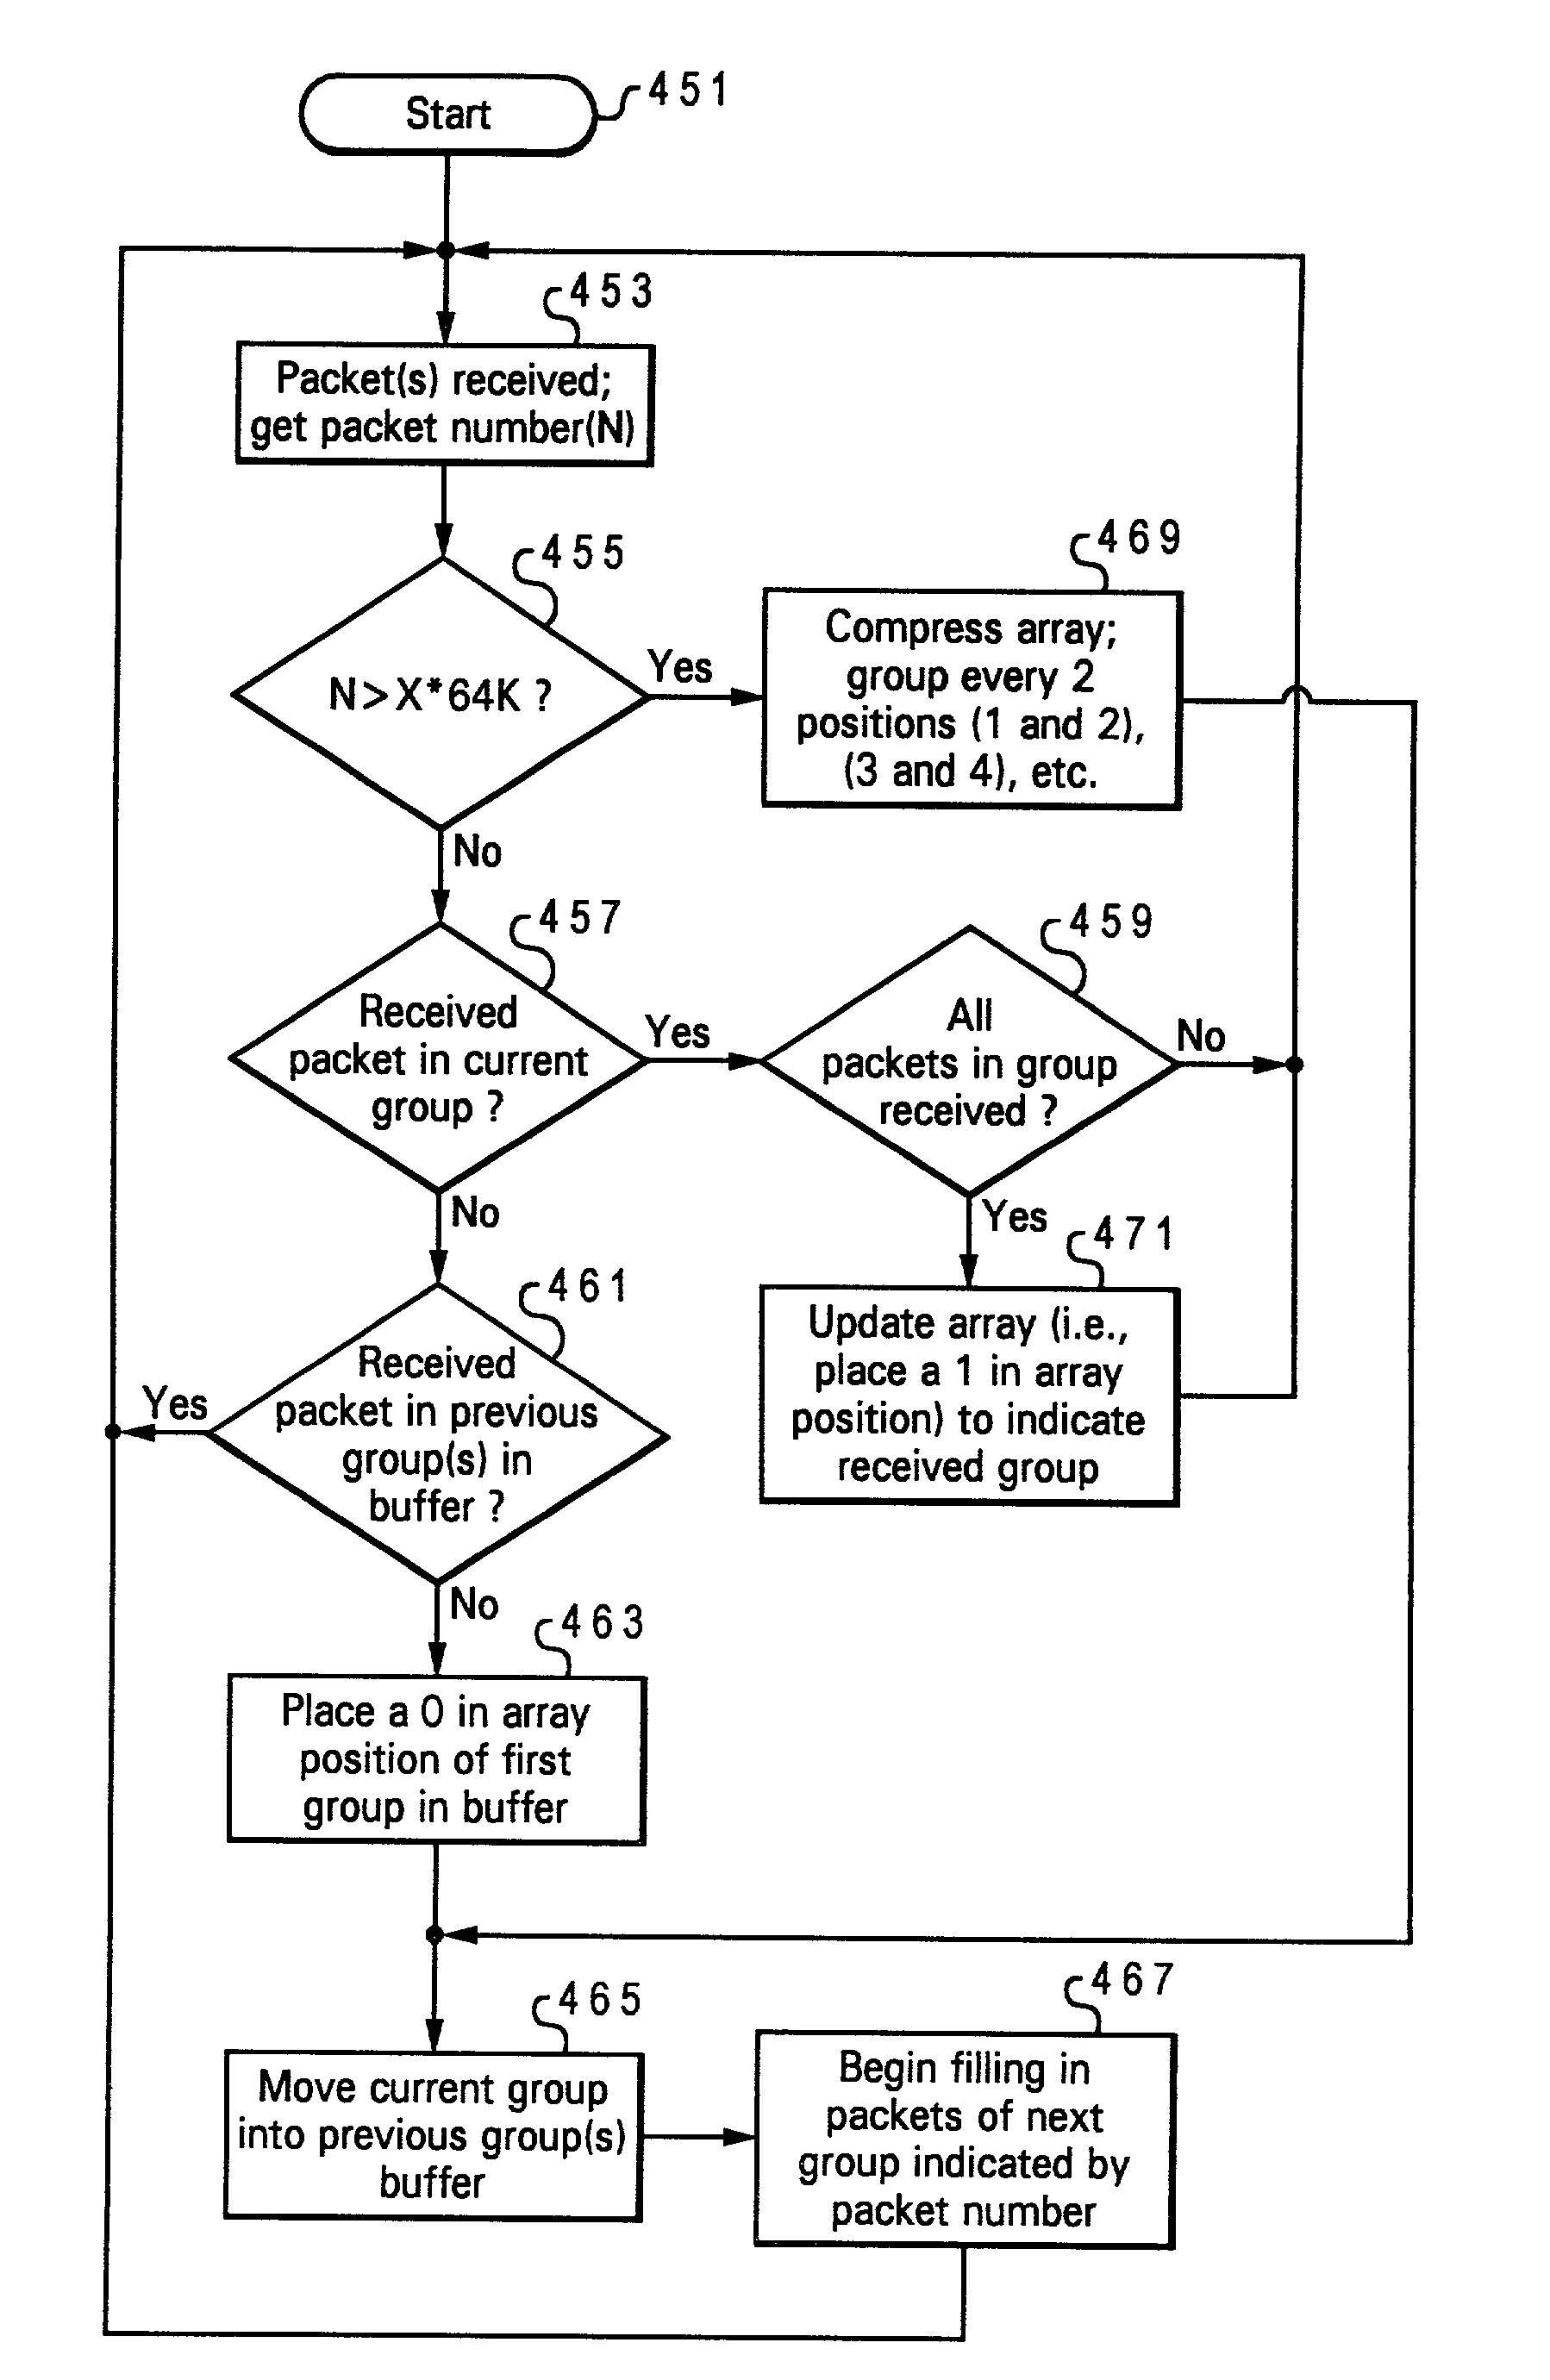 Method and system of tracking missing packets in a multicast TFTP environment